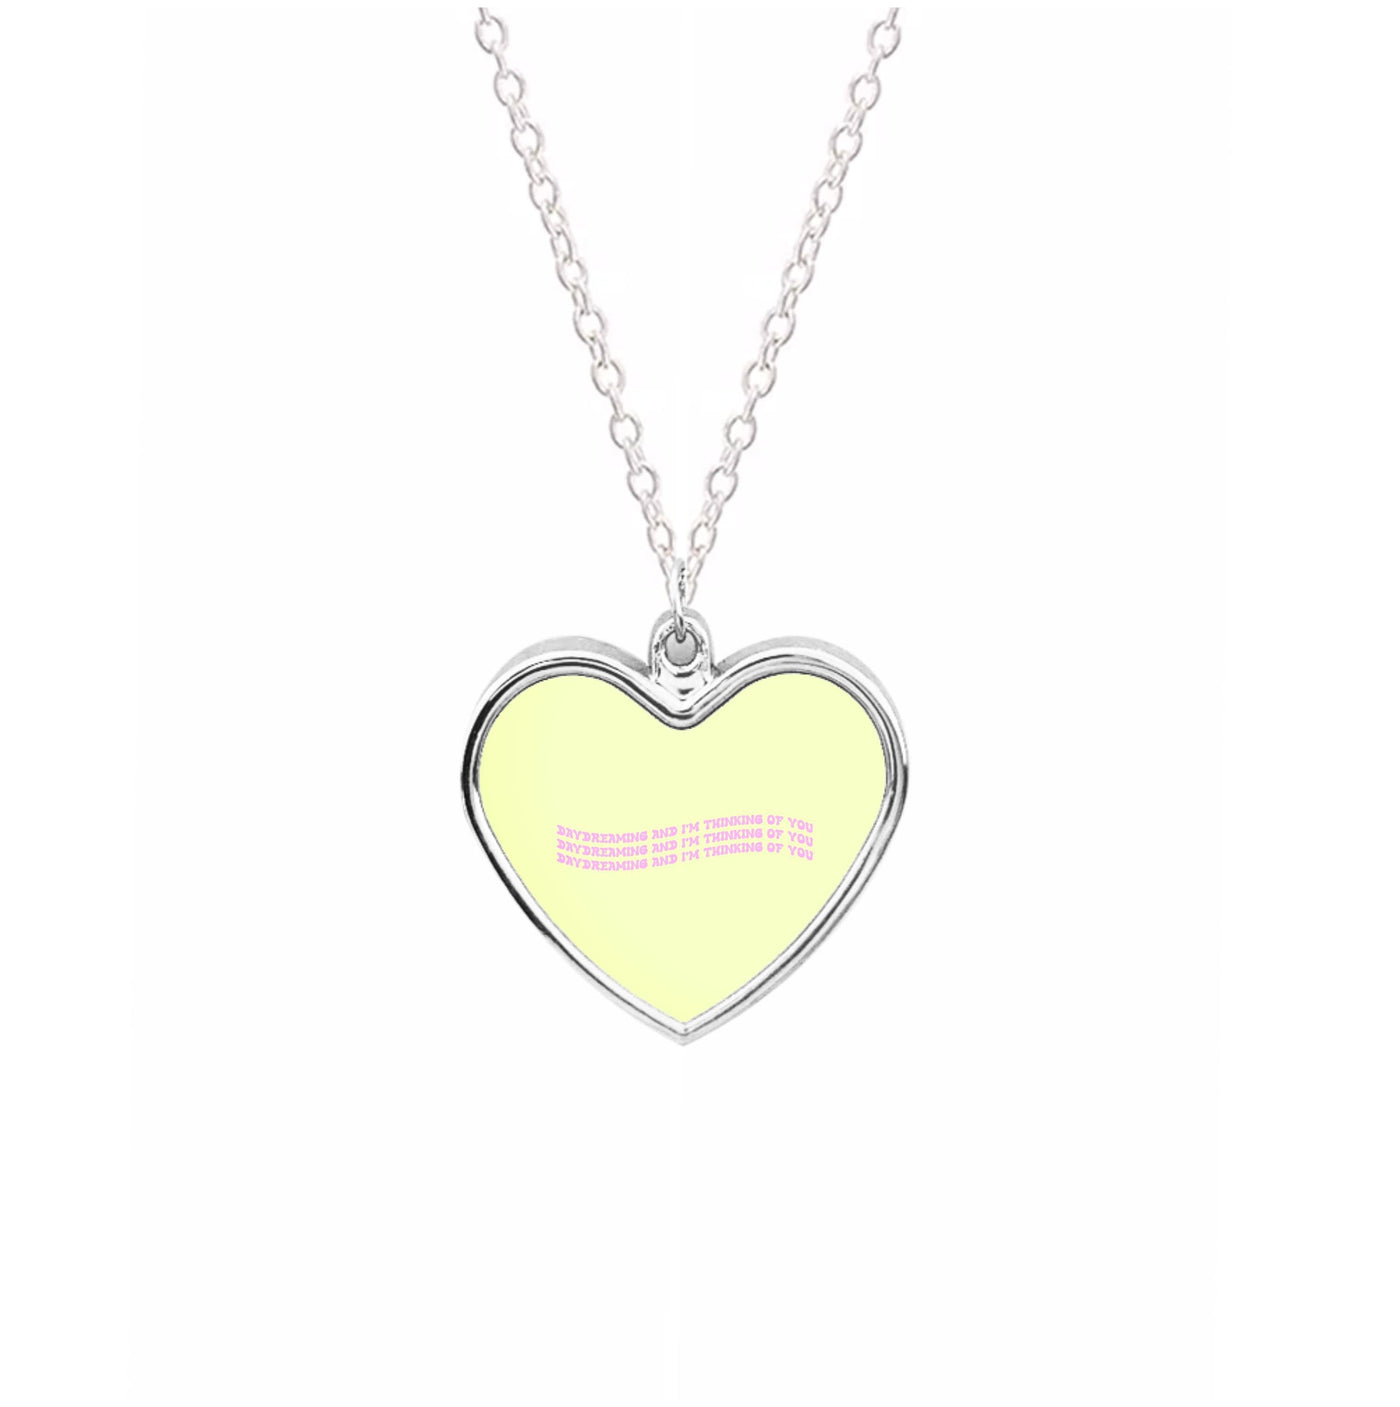 Daydreaming - Easylife Necklace